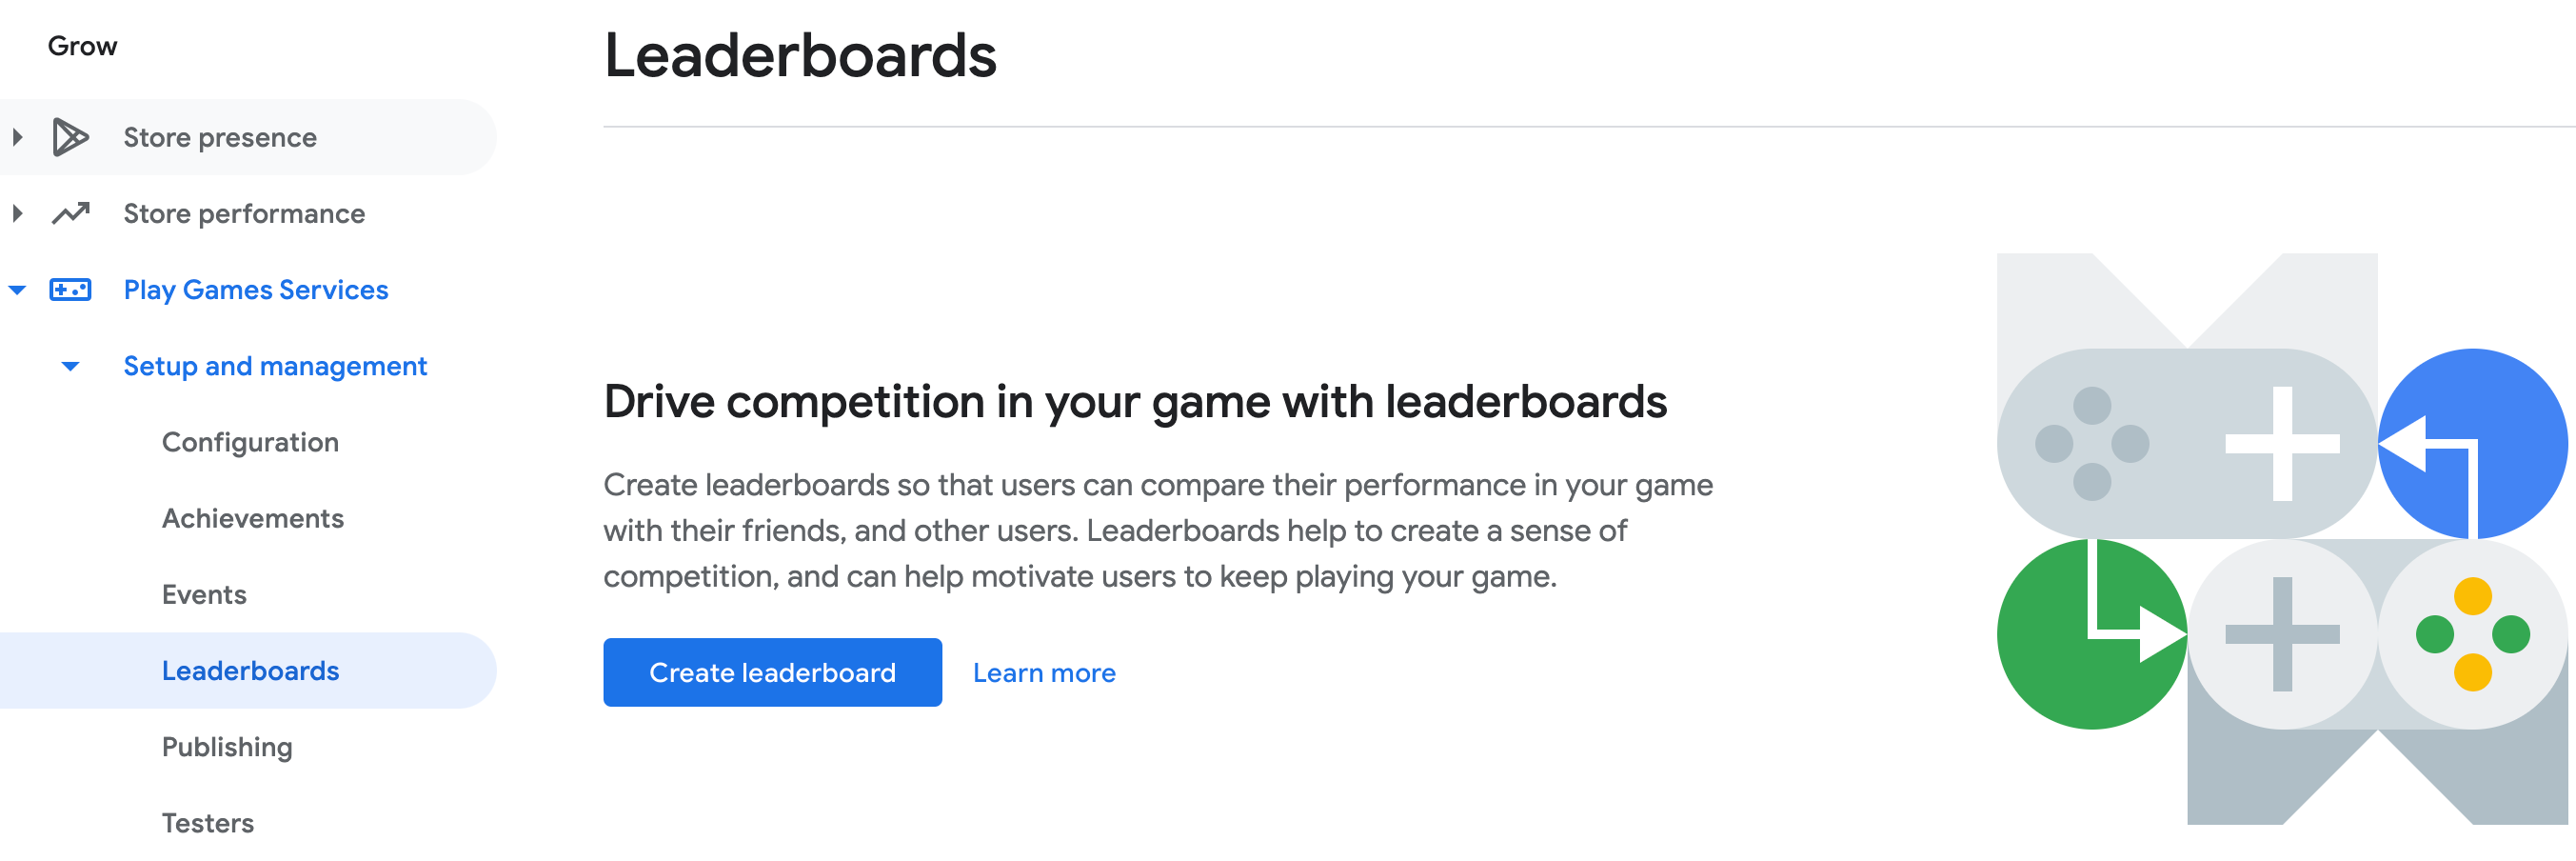 How to build a real-time gaming leaderboard